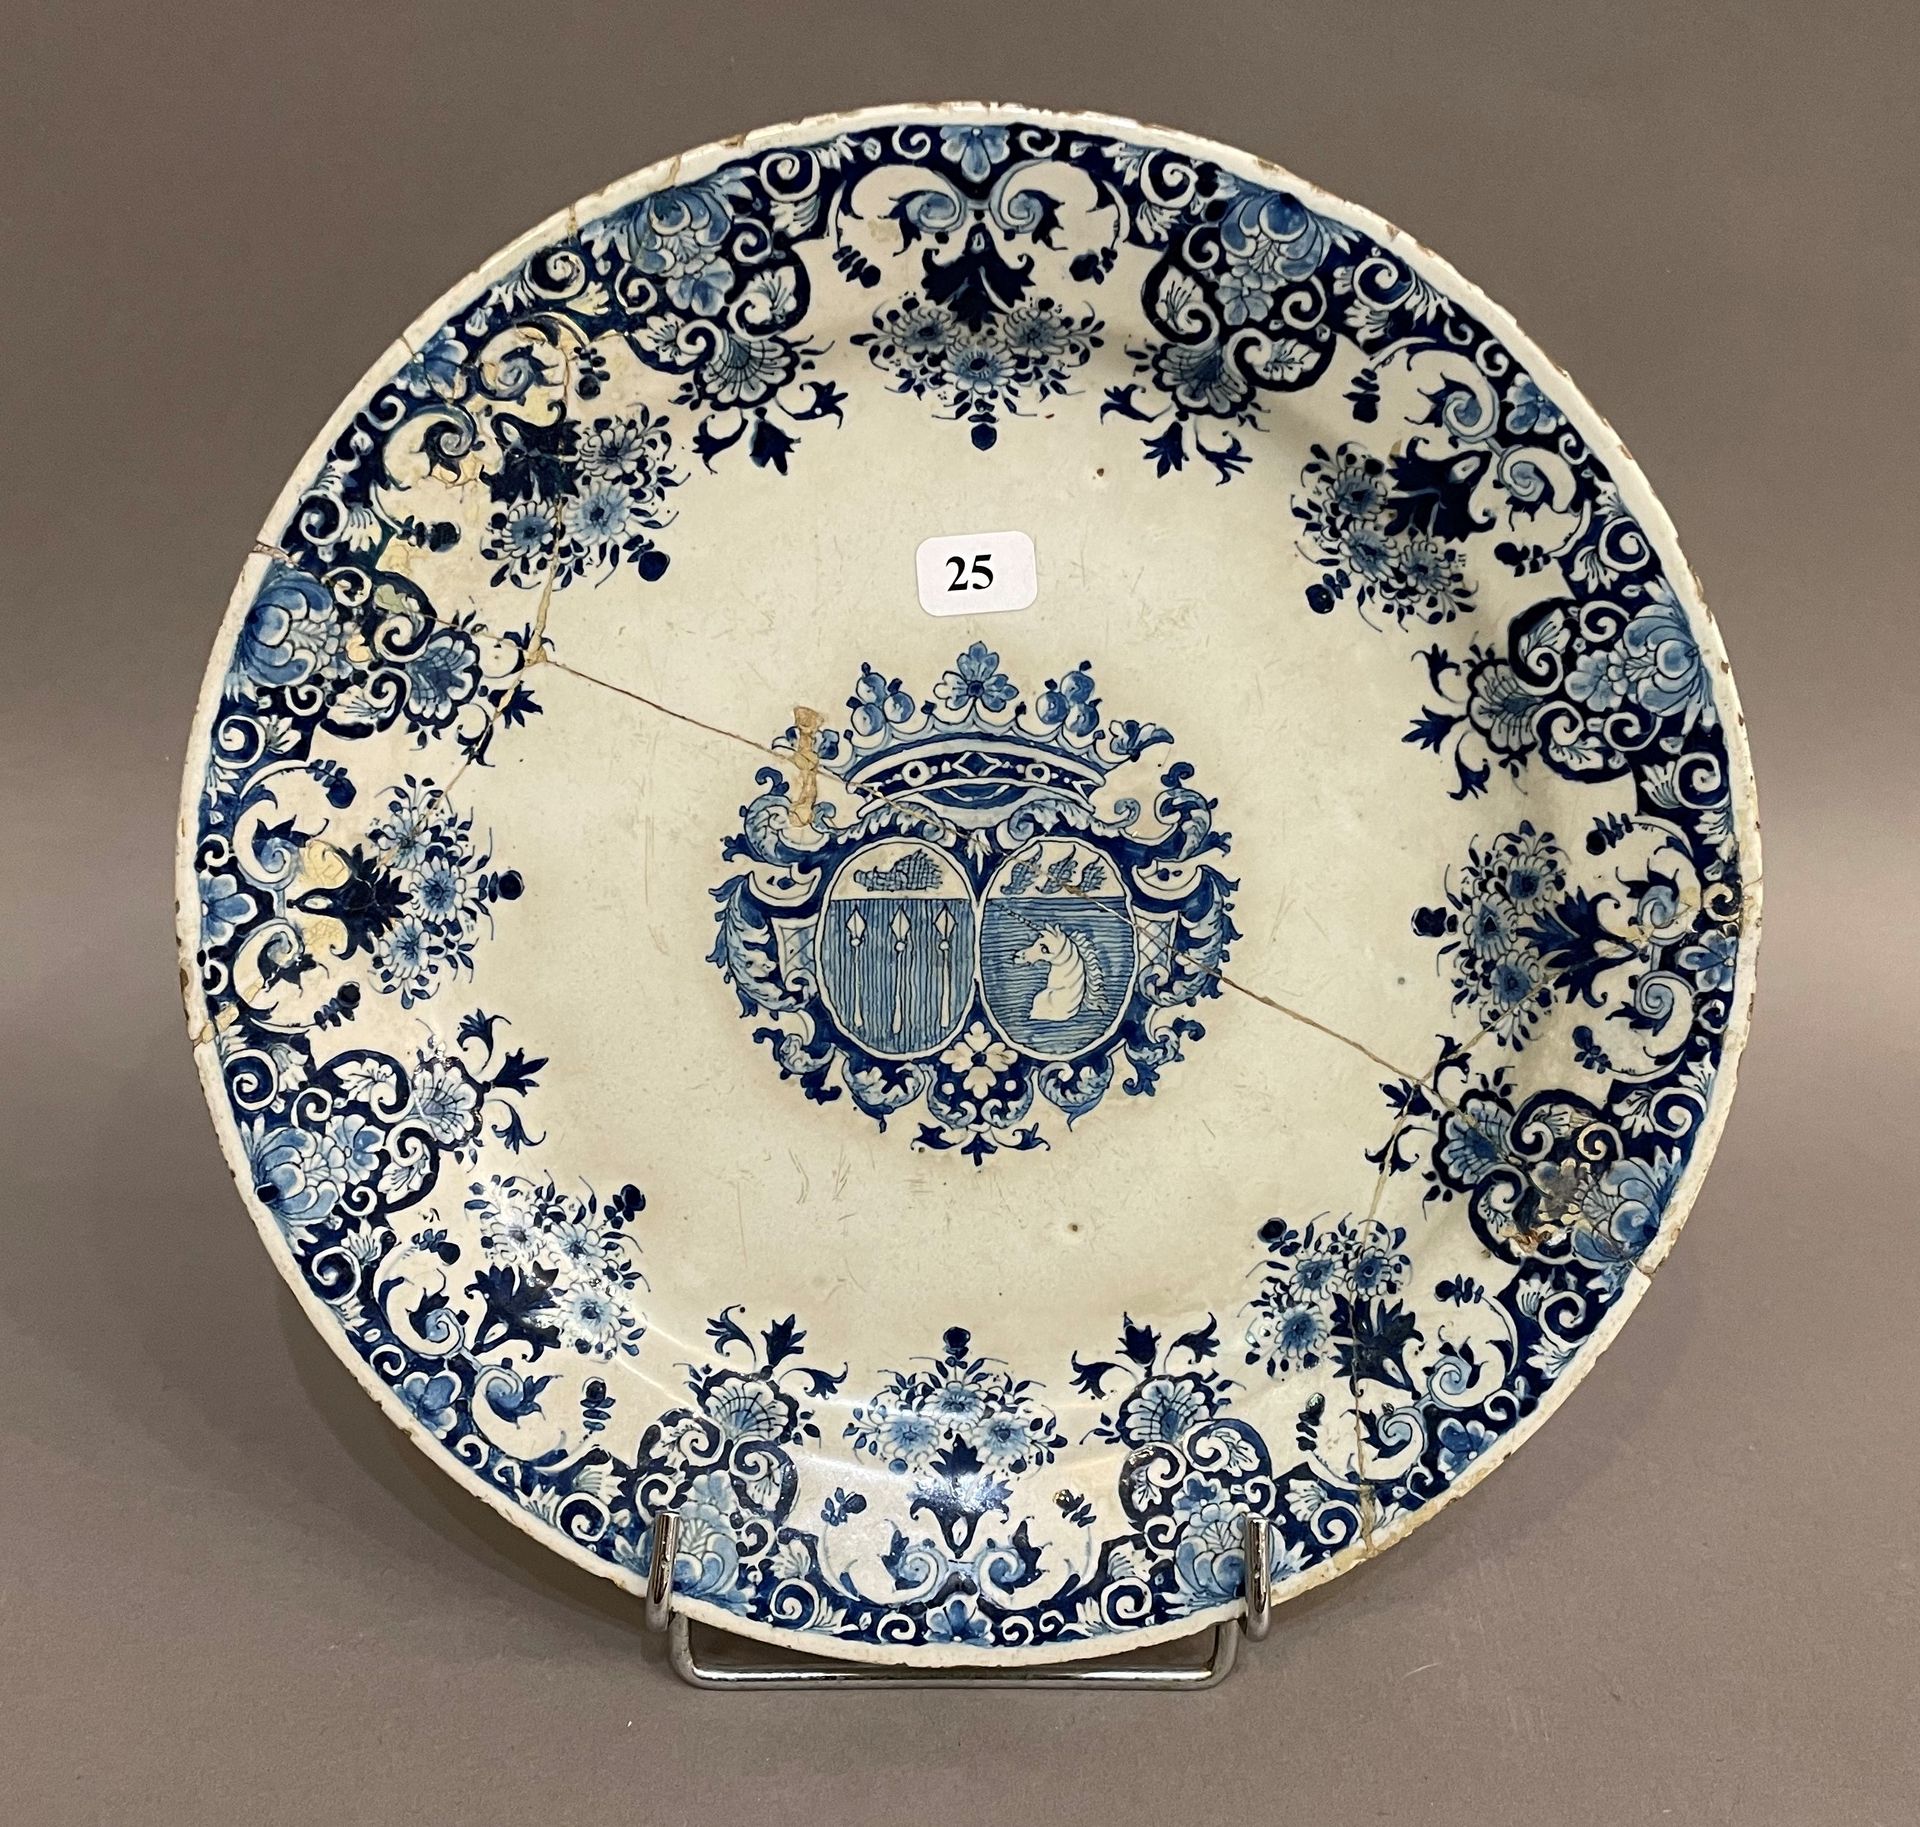 Null Rouen

Earthenware plate with blue monochrome decoration of coats of arms i&hellip;